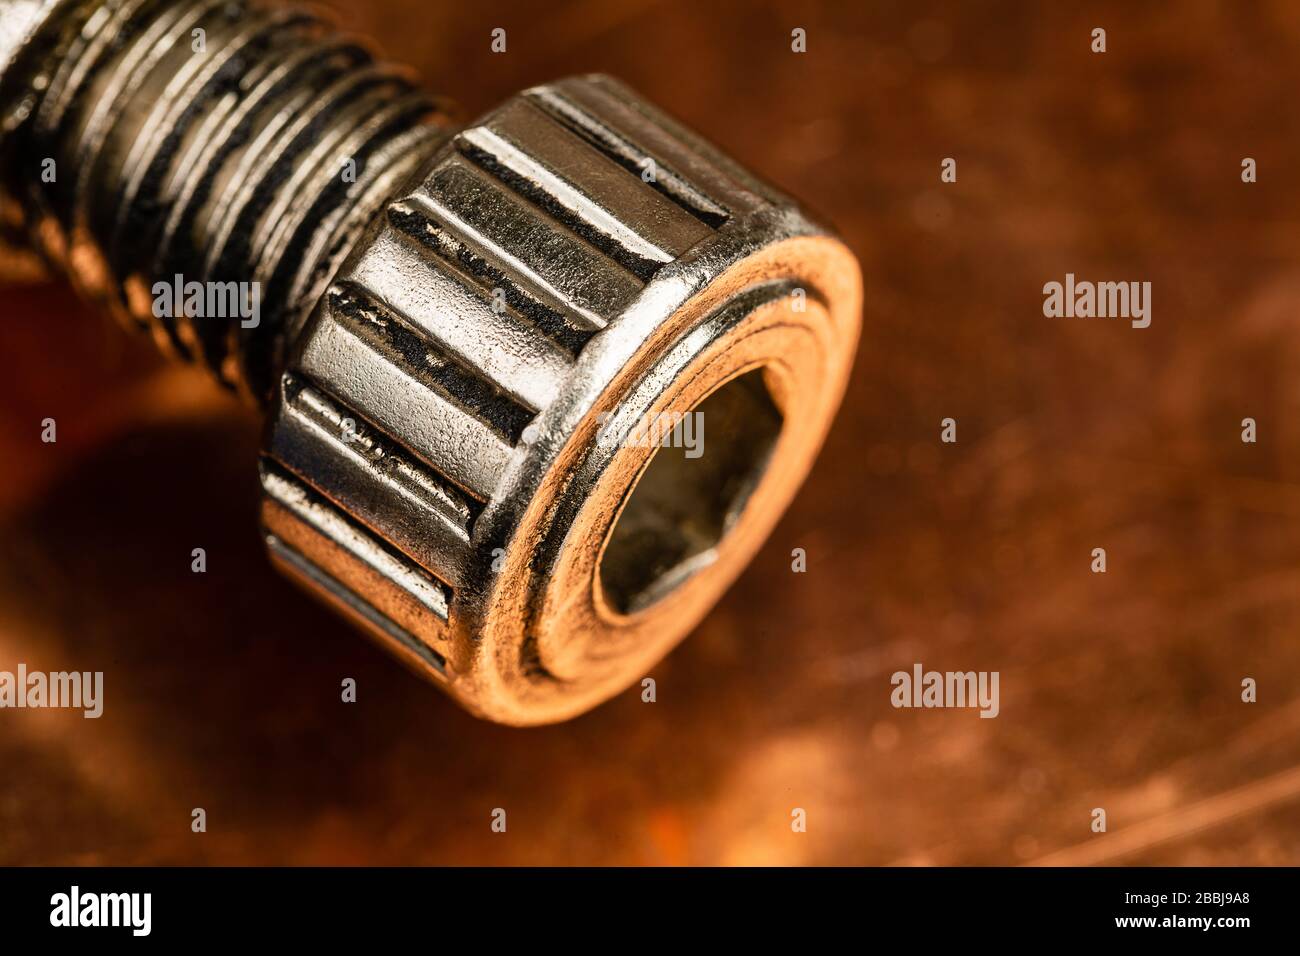 A warm toned macro image of a heavy duty machine thumb screw with an allen wrench hole in the front of it, resting on a worn and oxidized copper work Stock Photo